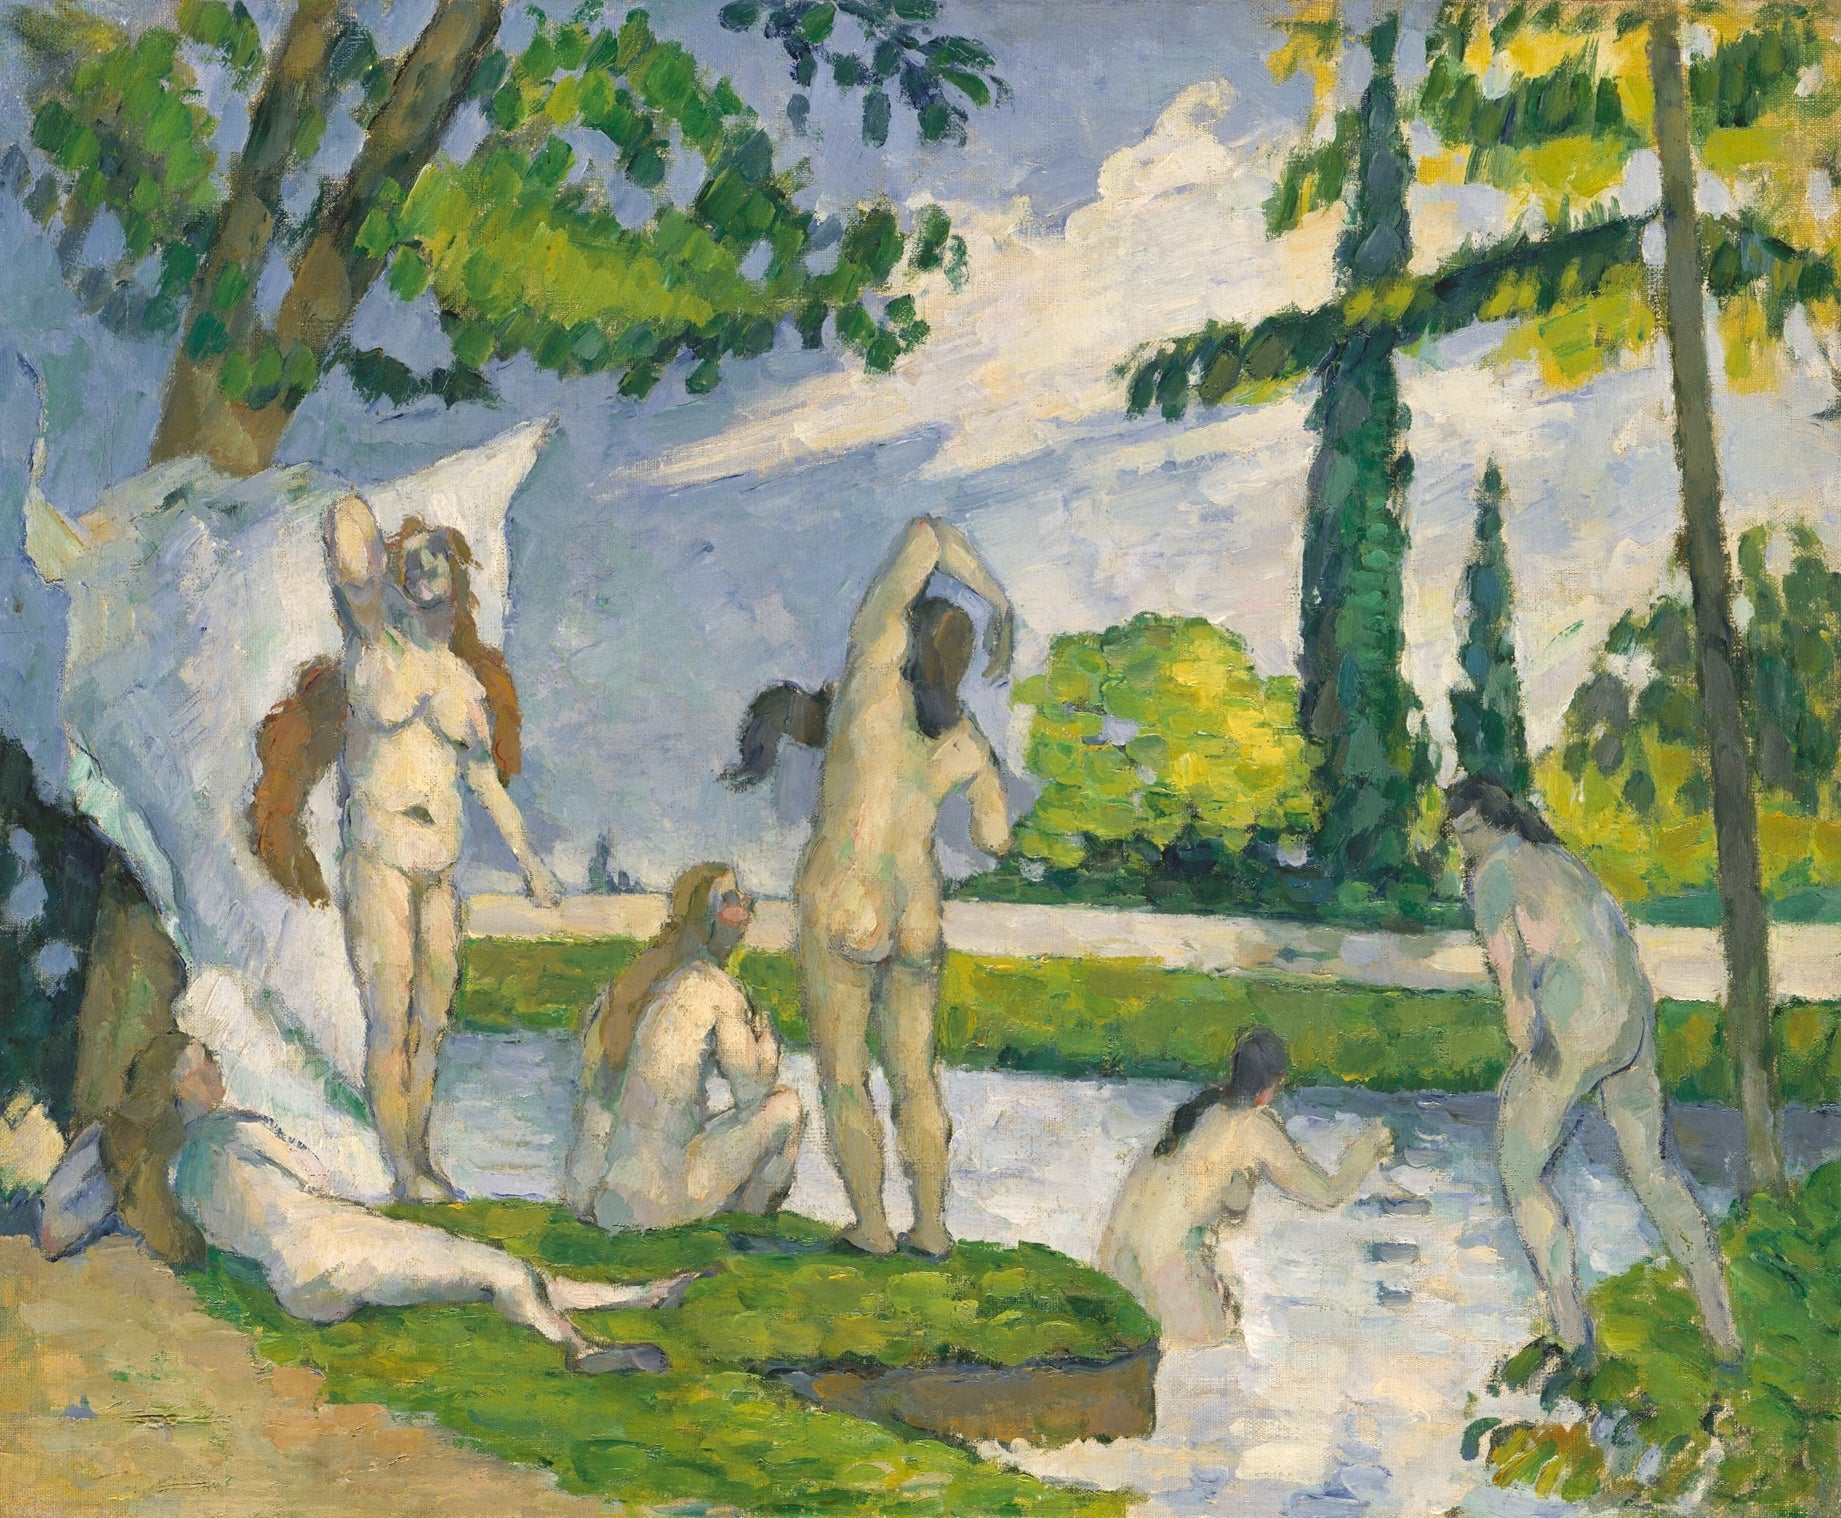 ‘Bathers’, 1874-75, is one of Cezanne’s first paintings of a subject that engaged him for the rest of his career